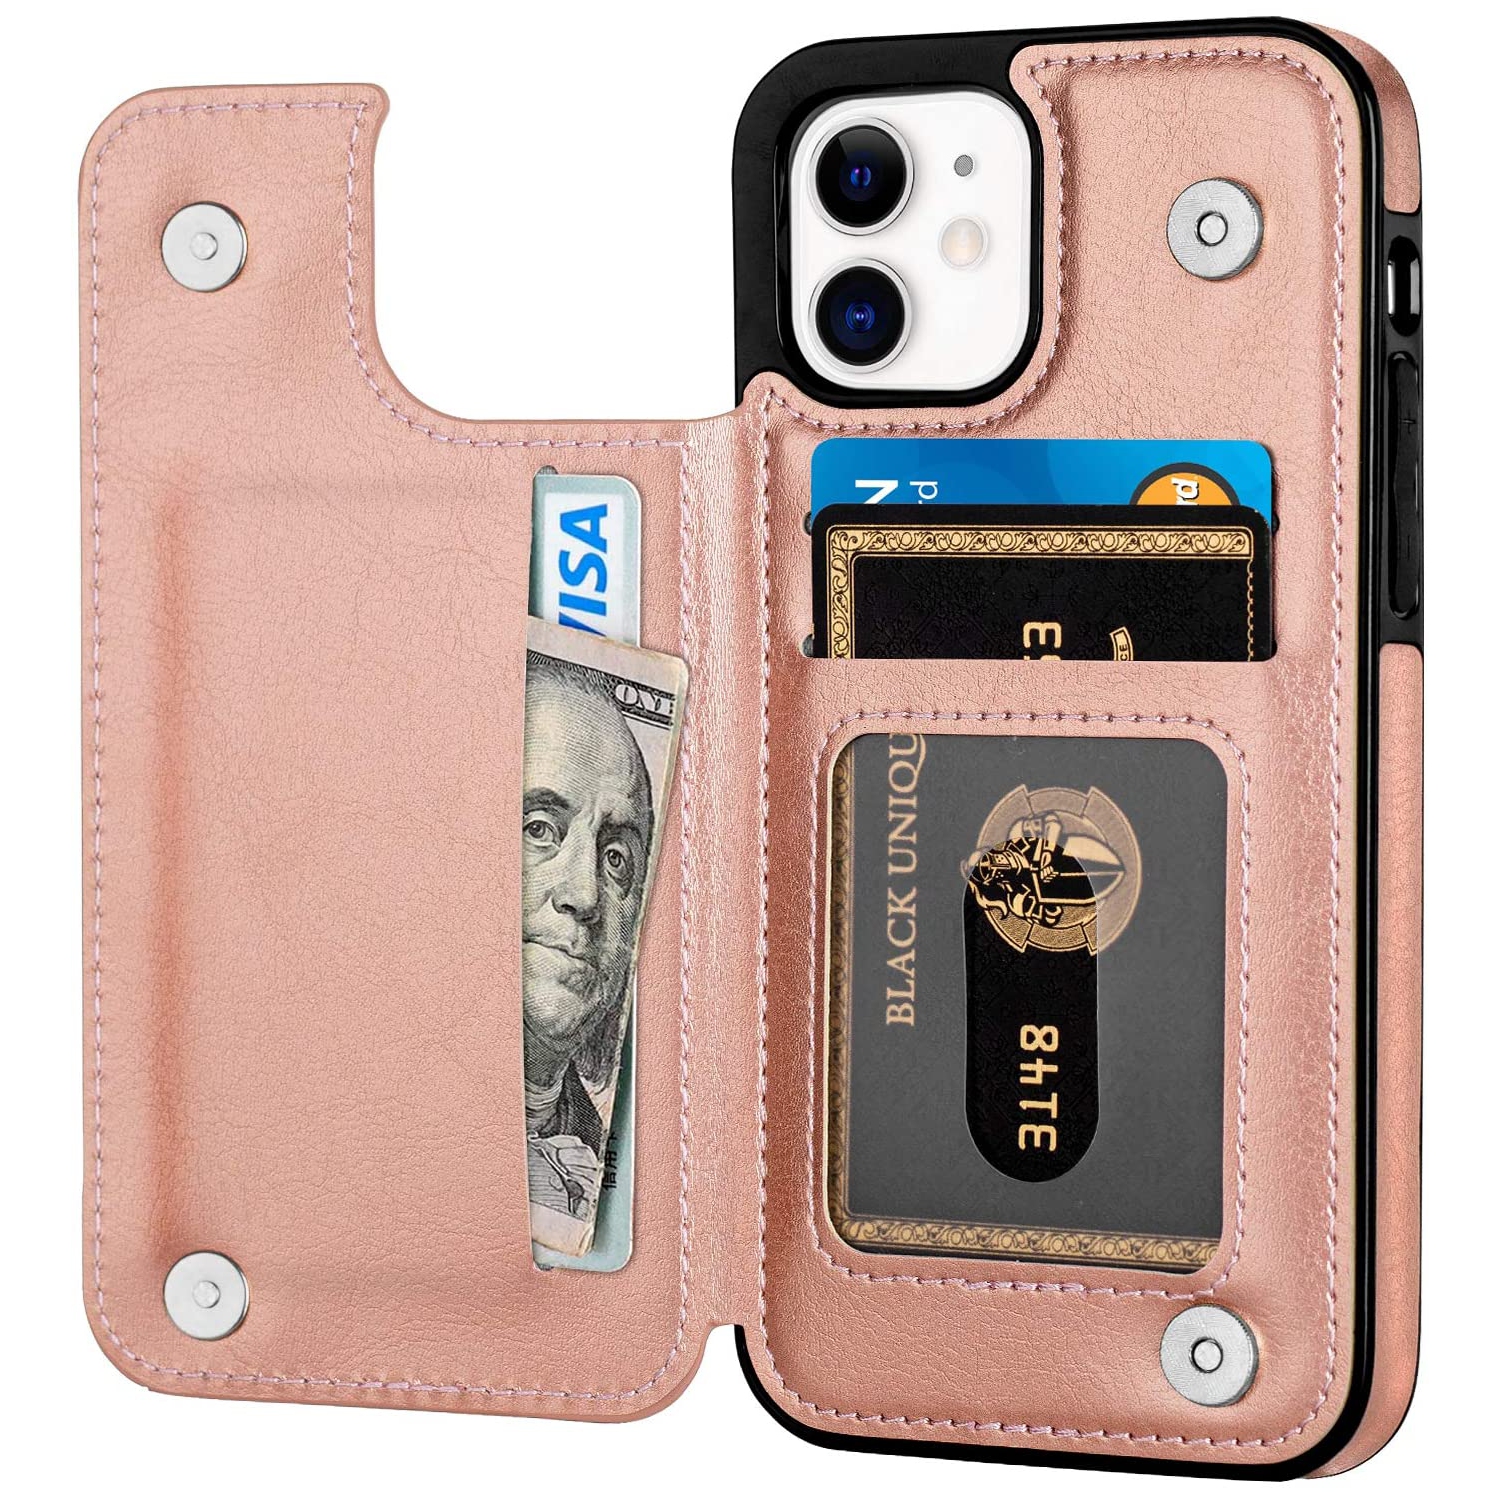 Loris & Case High Quality Leather Back Case Kickstand Shockproof Protective Card Holder Wallet Cover Case for iPhone 13 PRO MAX -Pink (FREE SHIPPING)